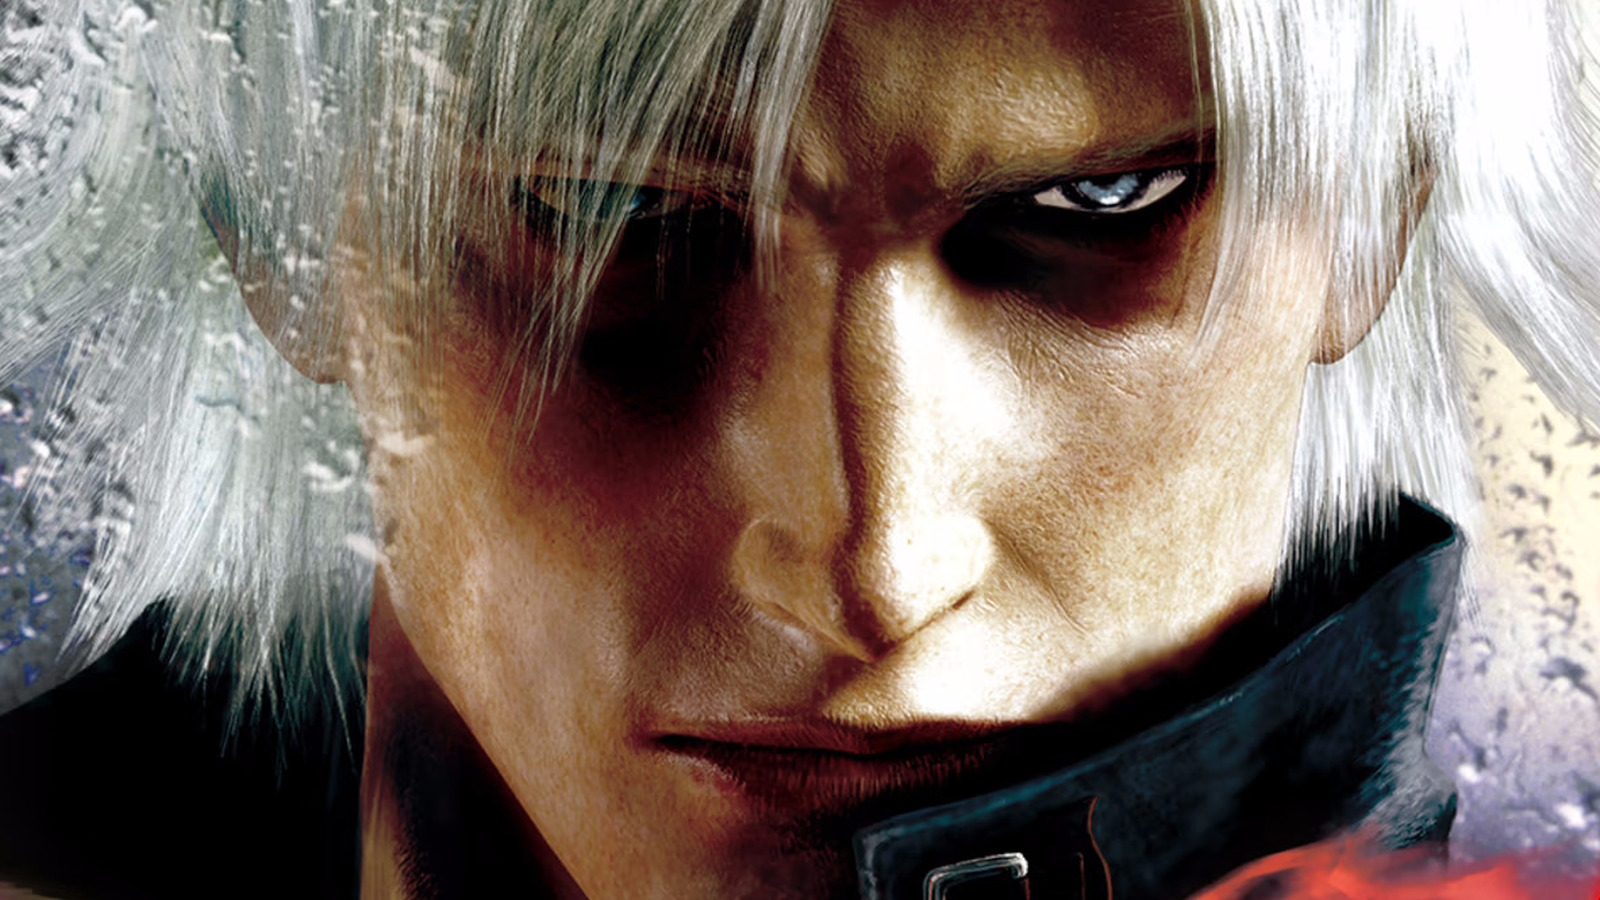 The Original Devil May Cry - The Original Devil May Cry